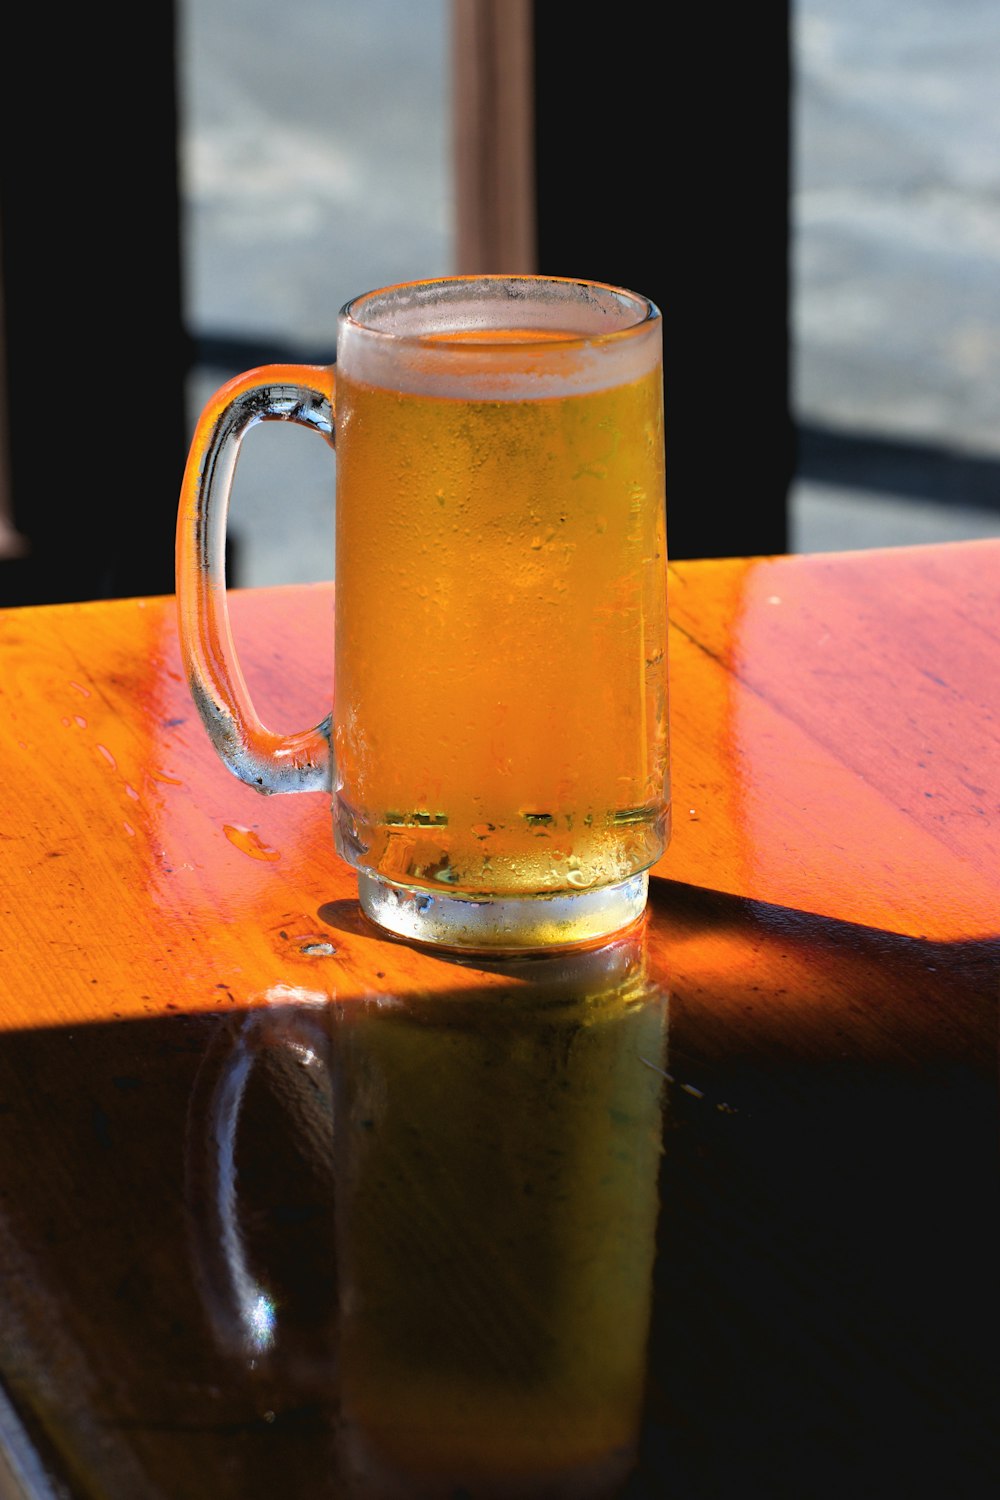 clear glass beer mug on brown wooden table